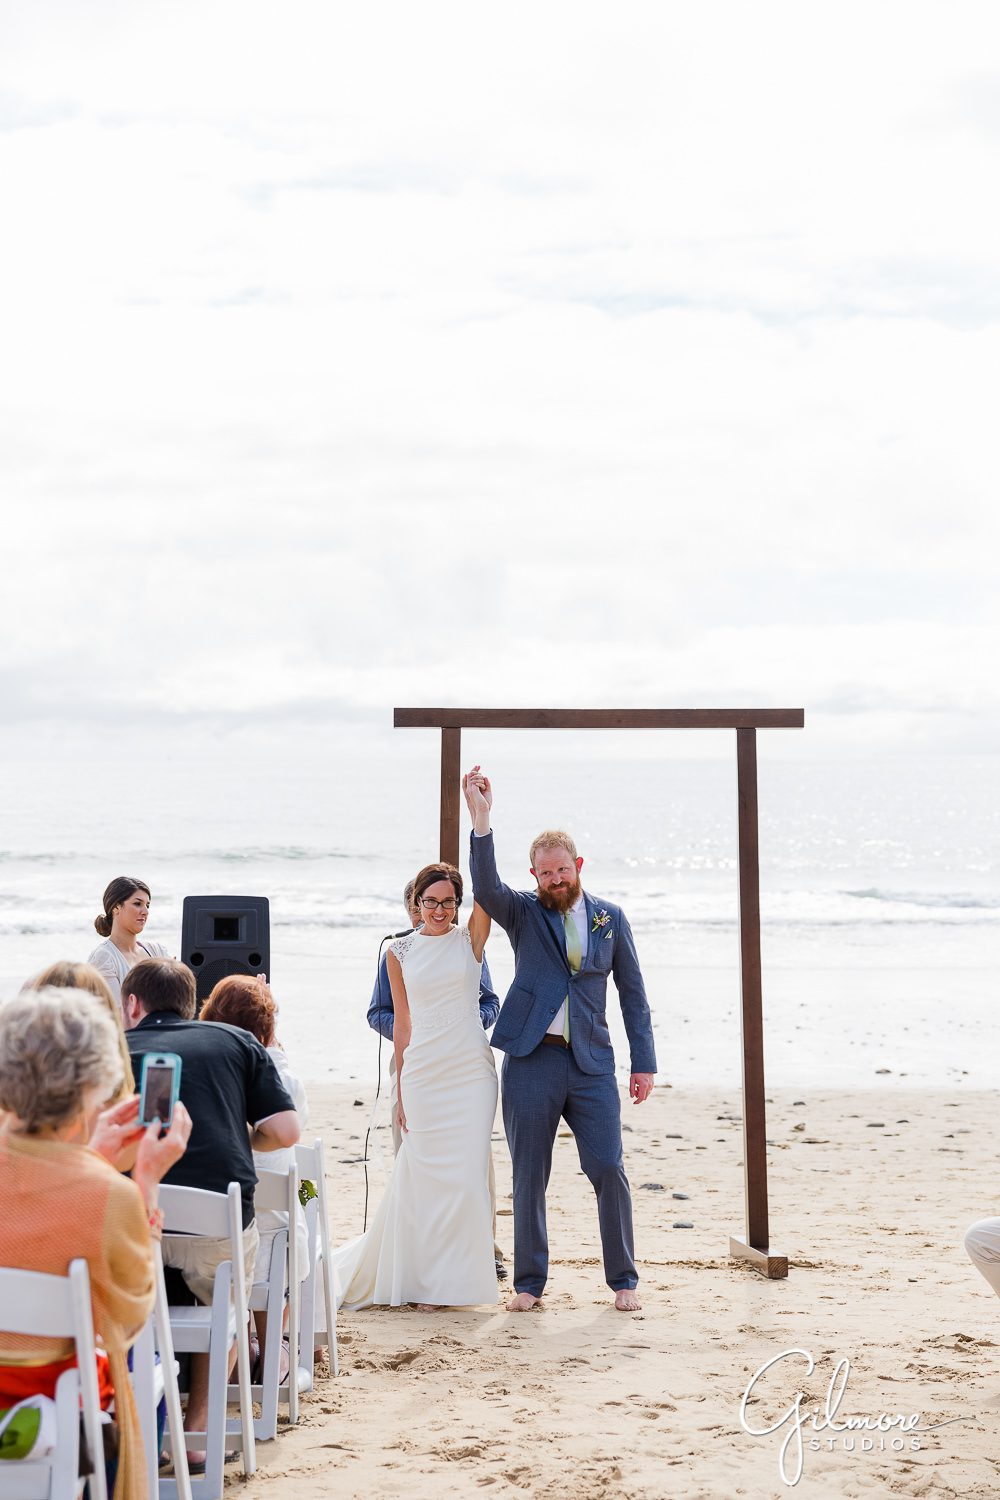 just married, beach ceremony, Orange County, sand, ocean, photography, beaches, venue, OC, crystal cove cottages